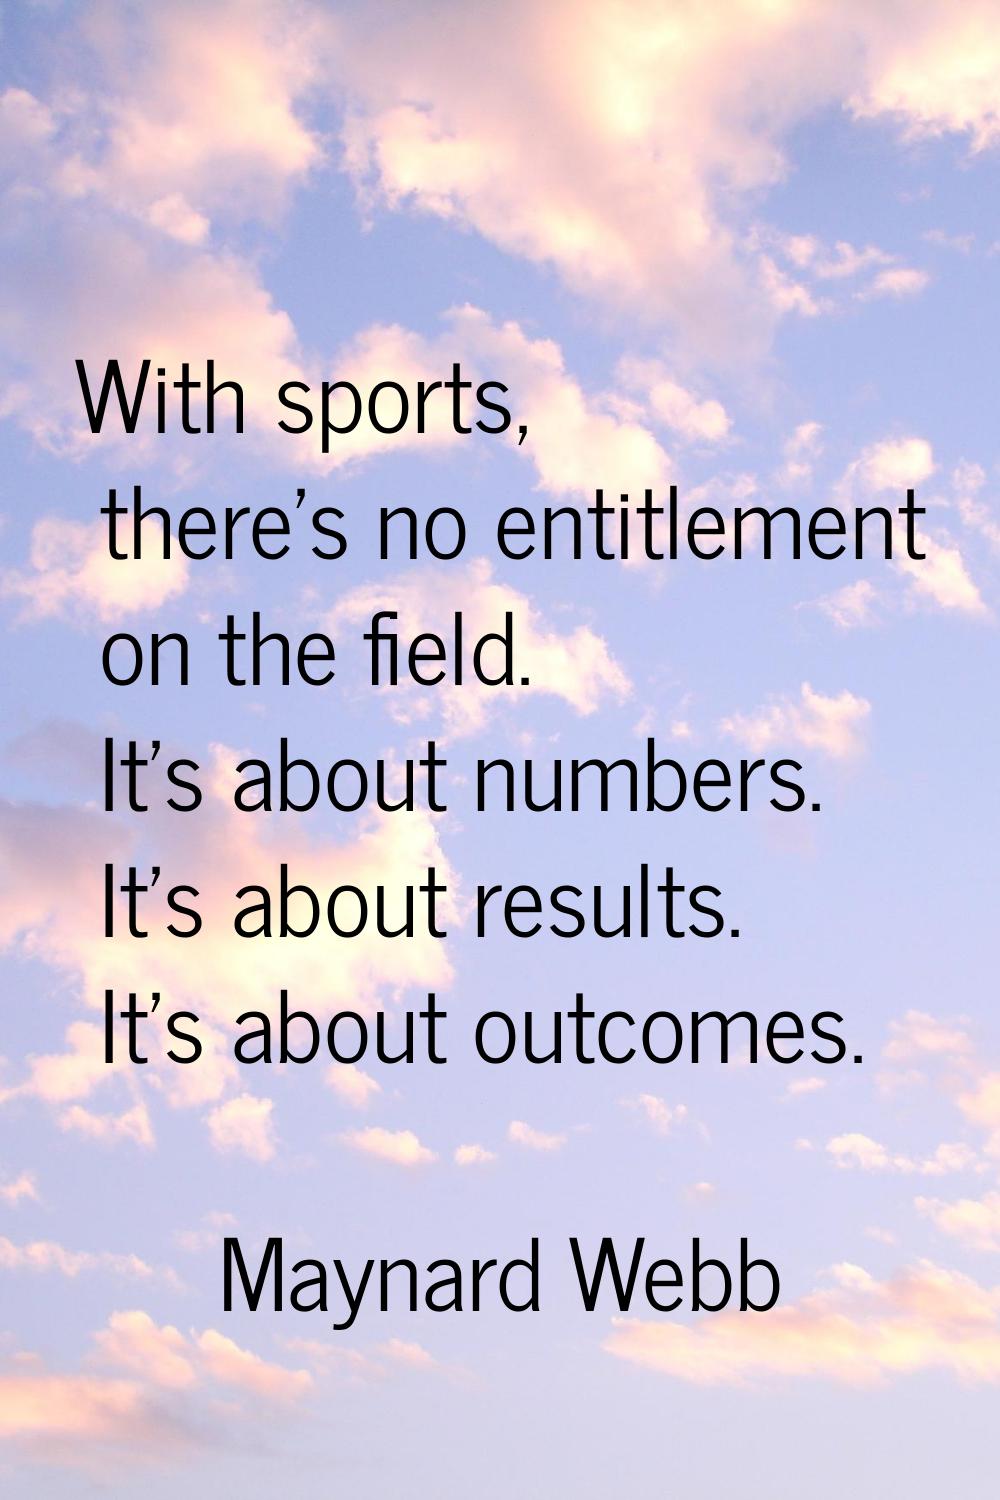 With sports, there's no entitlement on the field. It's about numbers. It's about results. It's abou